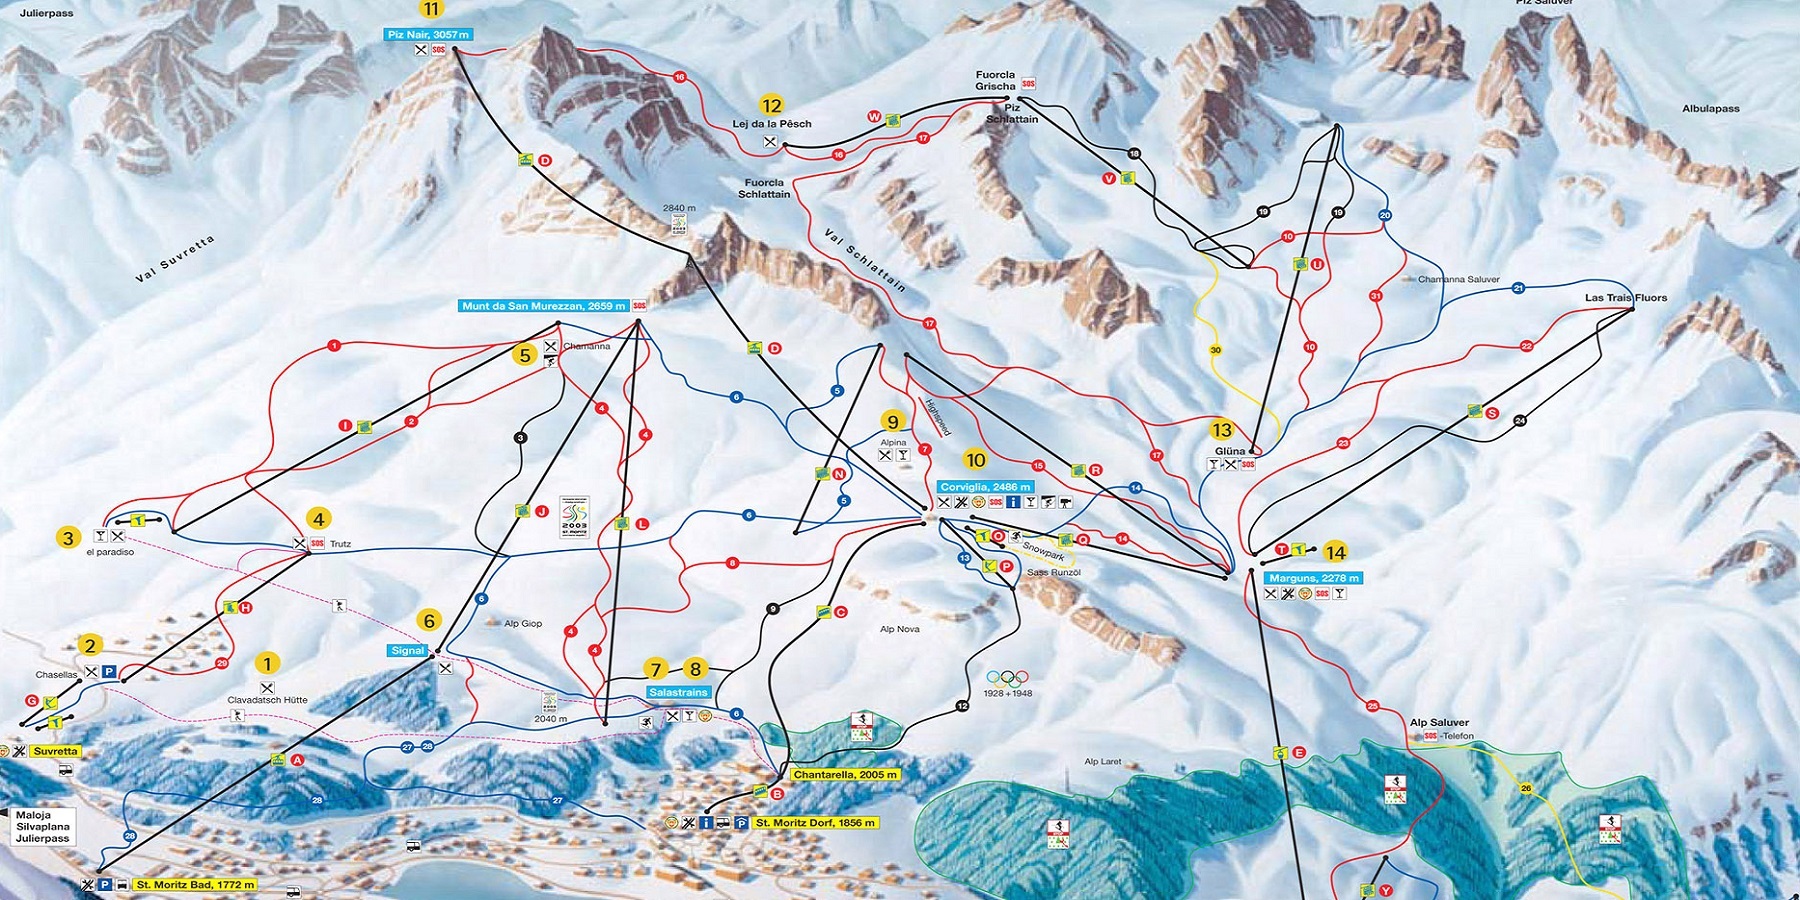 Ski slopes and lifts in St. Moritz